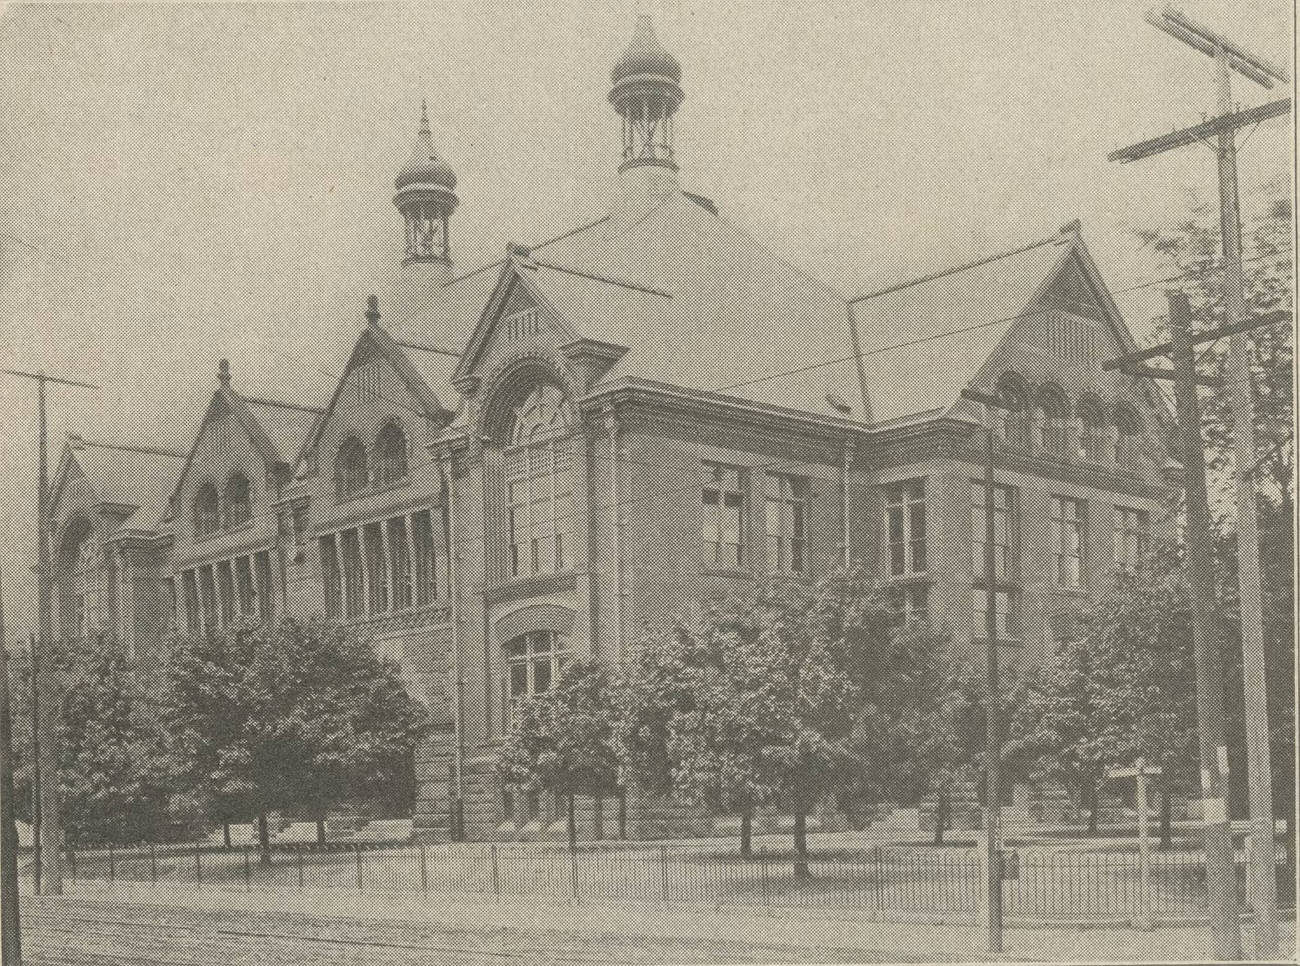 Avondale Elementary School on Avondale Avenue, construction began around 1892, opened in 1893, renovated in 1953 and 1968, now an elementary school in the Columbus City School District, June 9, 1916.